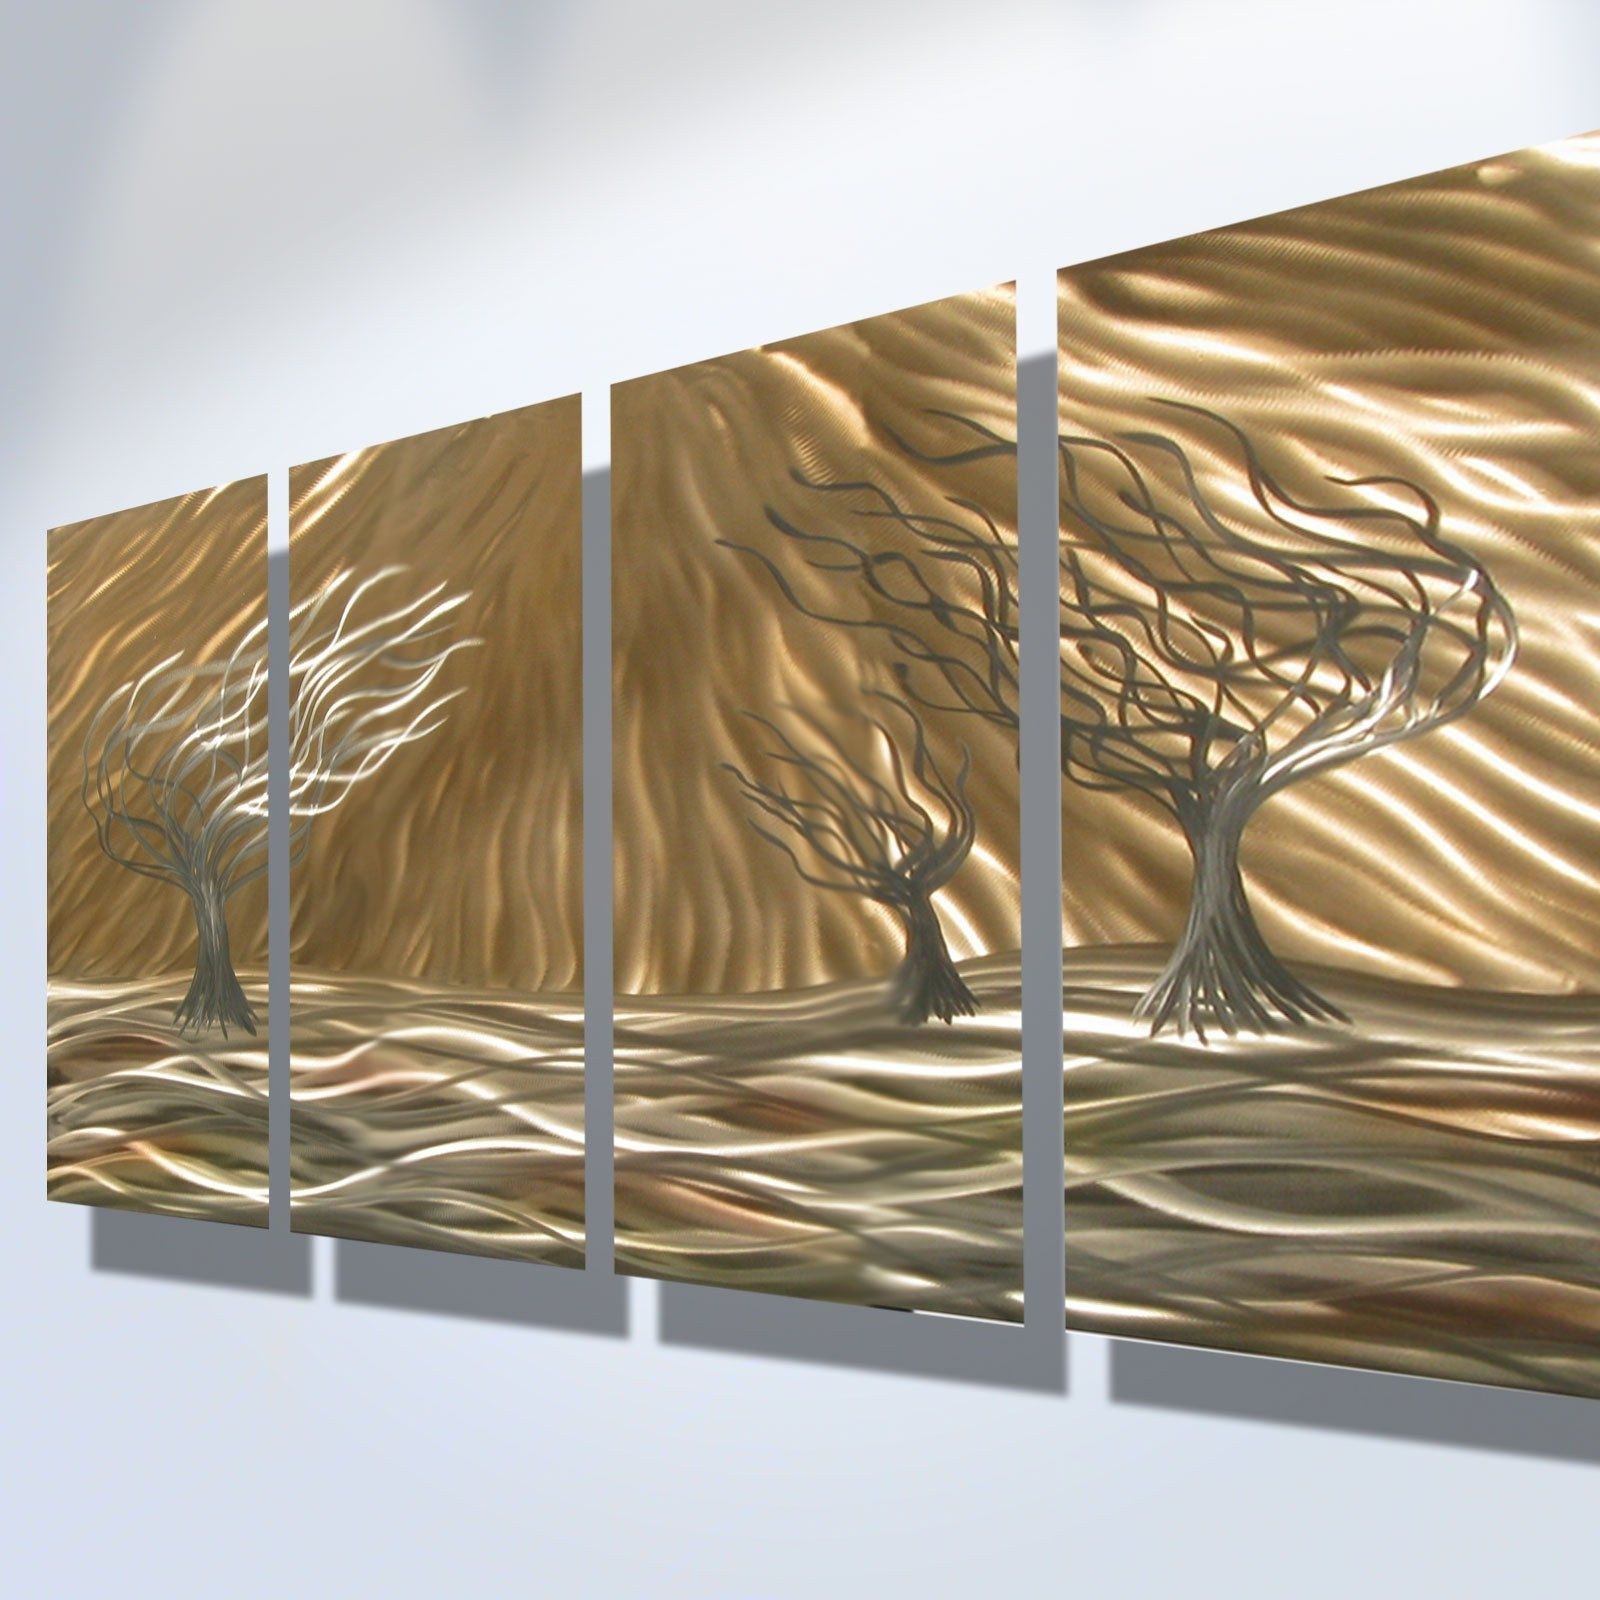 Imposing Metal Wall Decor Metal Wall Decor Hardscape Design D Wall Inside Abstract Metal Wall Art (View 6 of 20)